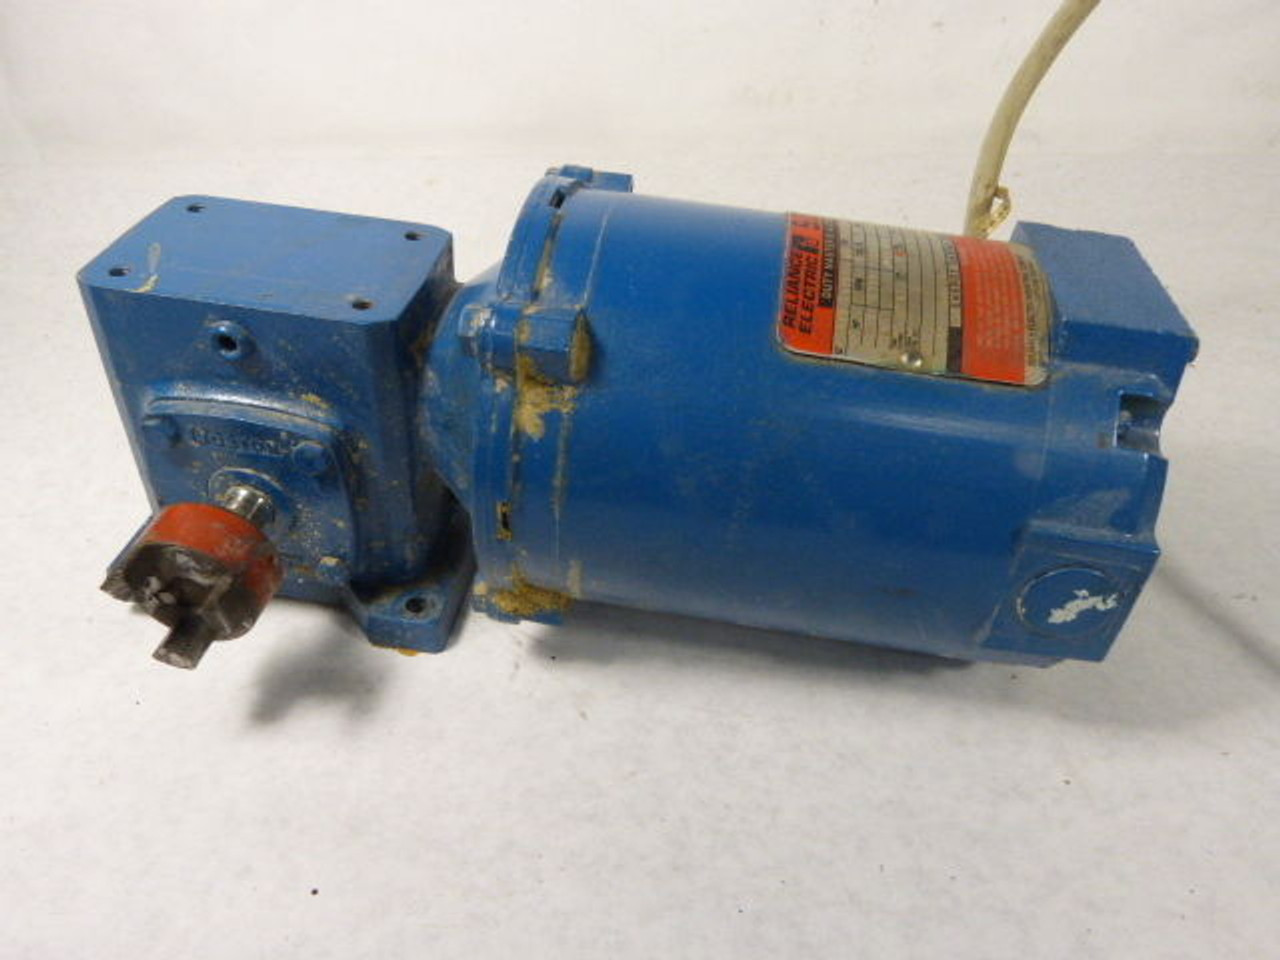 Reliance Electric 1/3HP 1725RPM 208-230 C/W Speed Reducer 15:1 Ratio USED